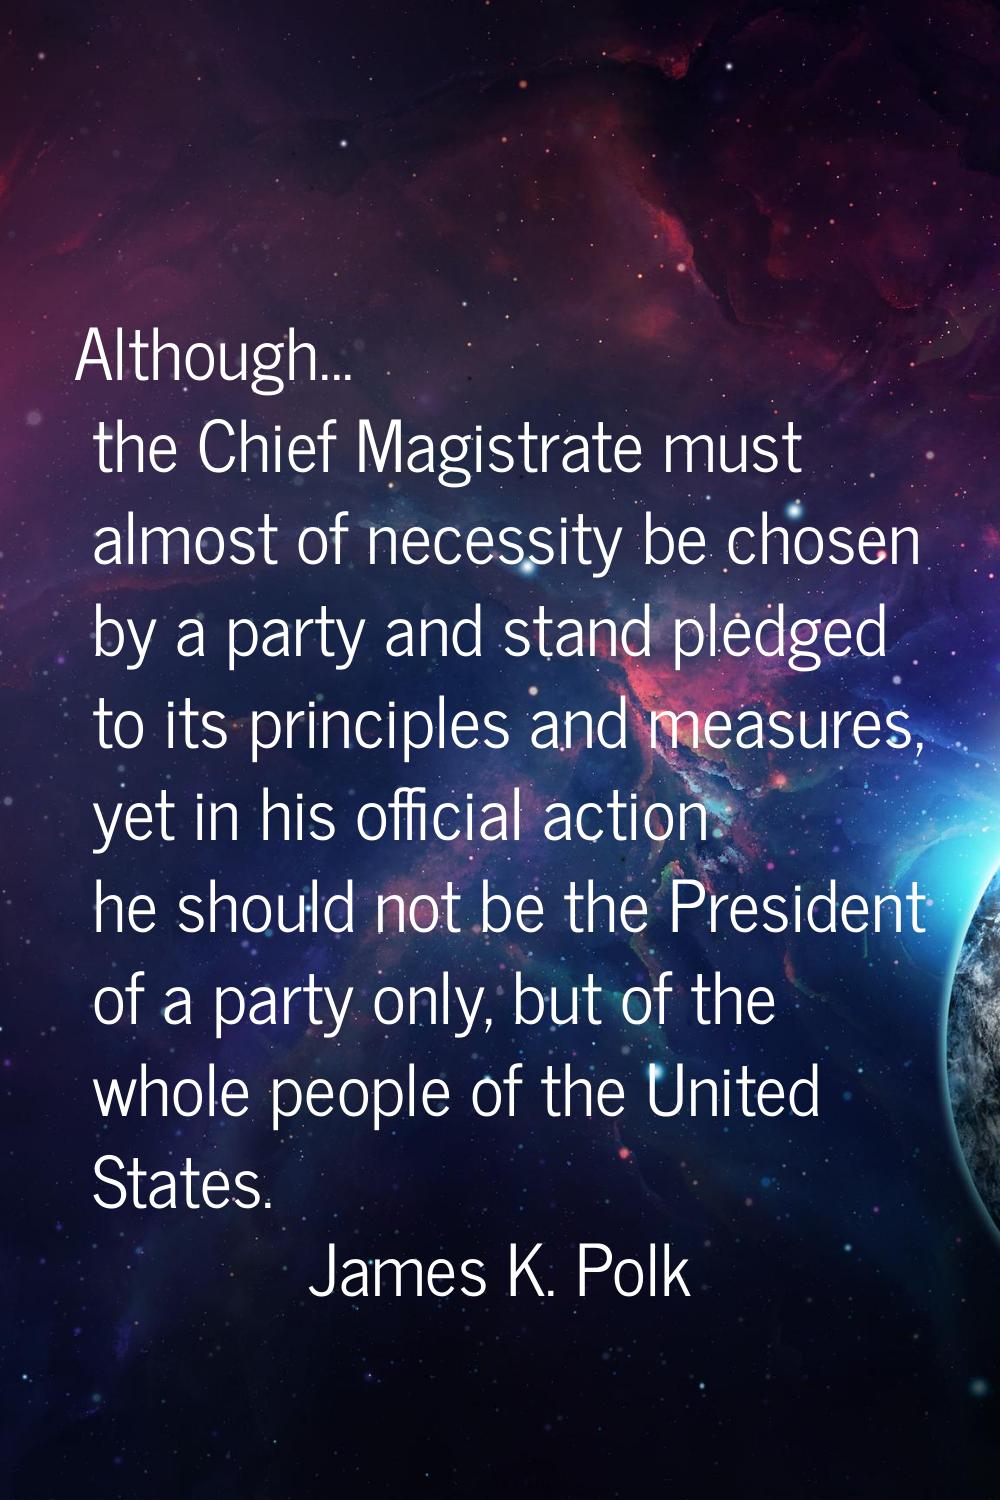 Although... the Chief Magistrate must almost of necessity be chosen by a party and stand pledged to